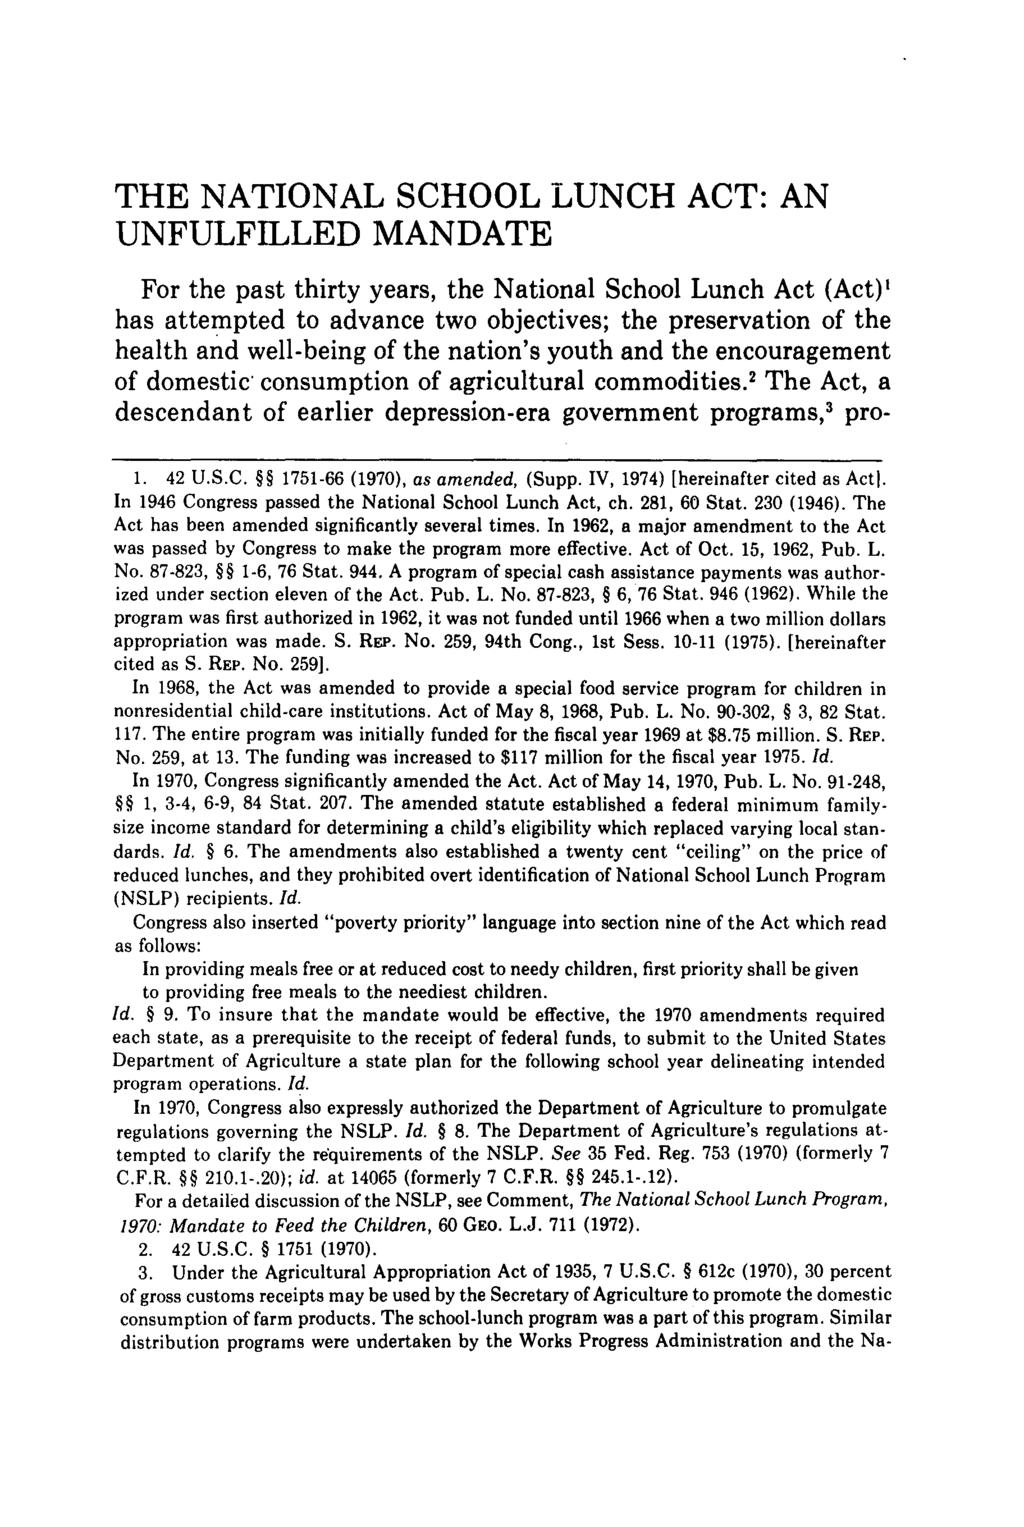 THE NATIONAL SCHOOL LUNCH ACT: AN UNFULFILLED MANDATE For the past thirty years, the National School Lunch Act (Act), has attempted to advance two objectives; the preservation of the health and